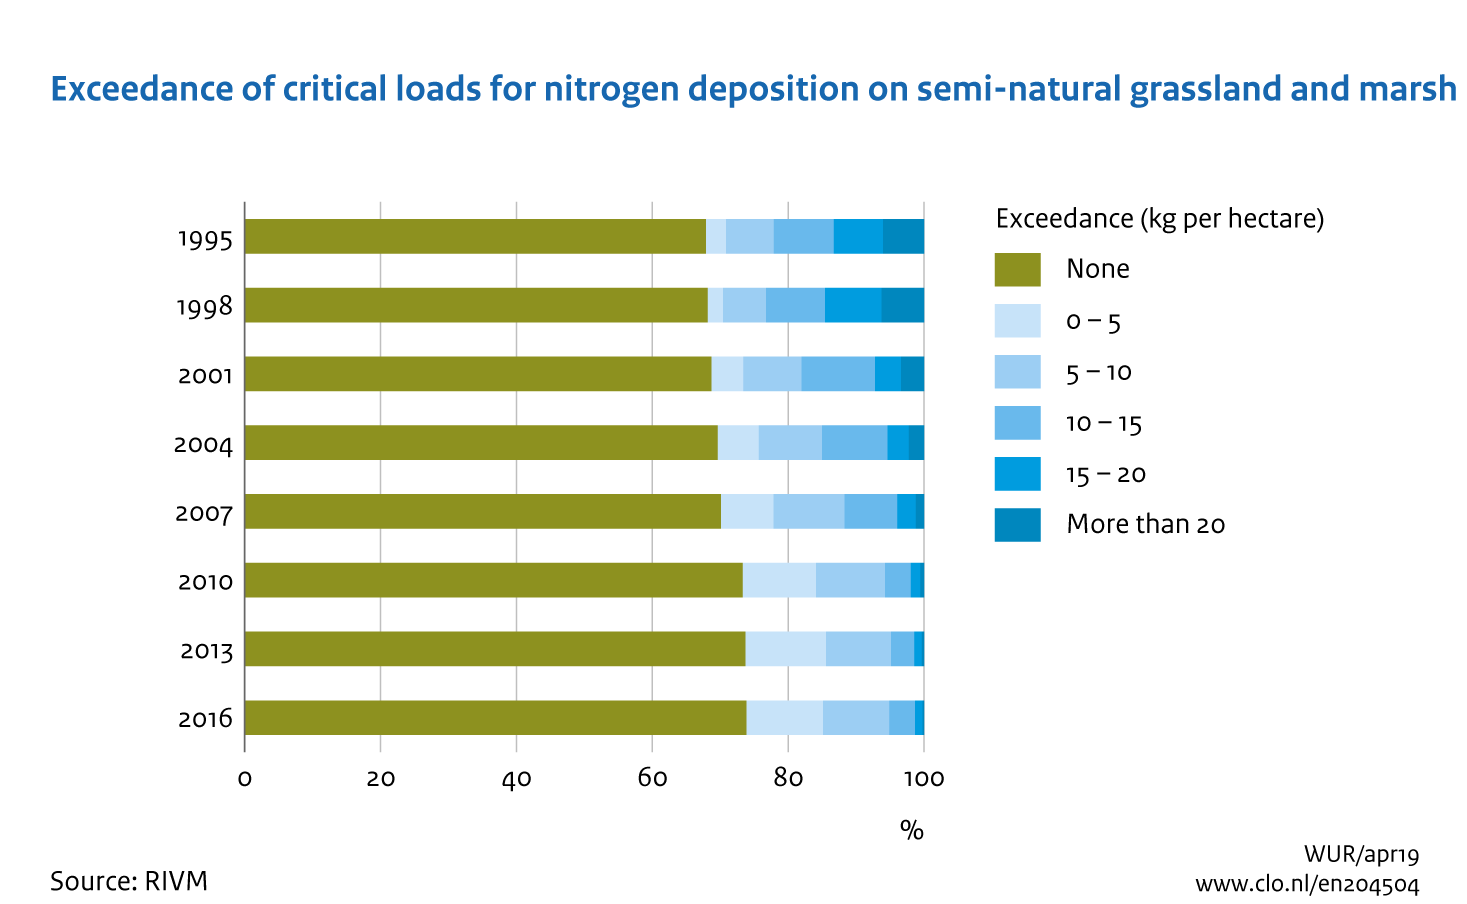 Image Exceedance of critical loads for nitrogen deposition on semi-natural grassland and marsh. The image is further explained in the text.